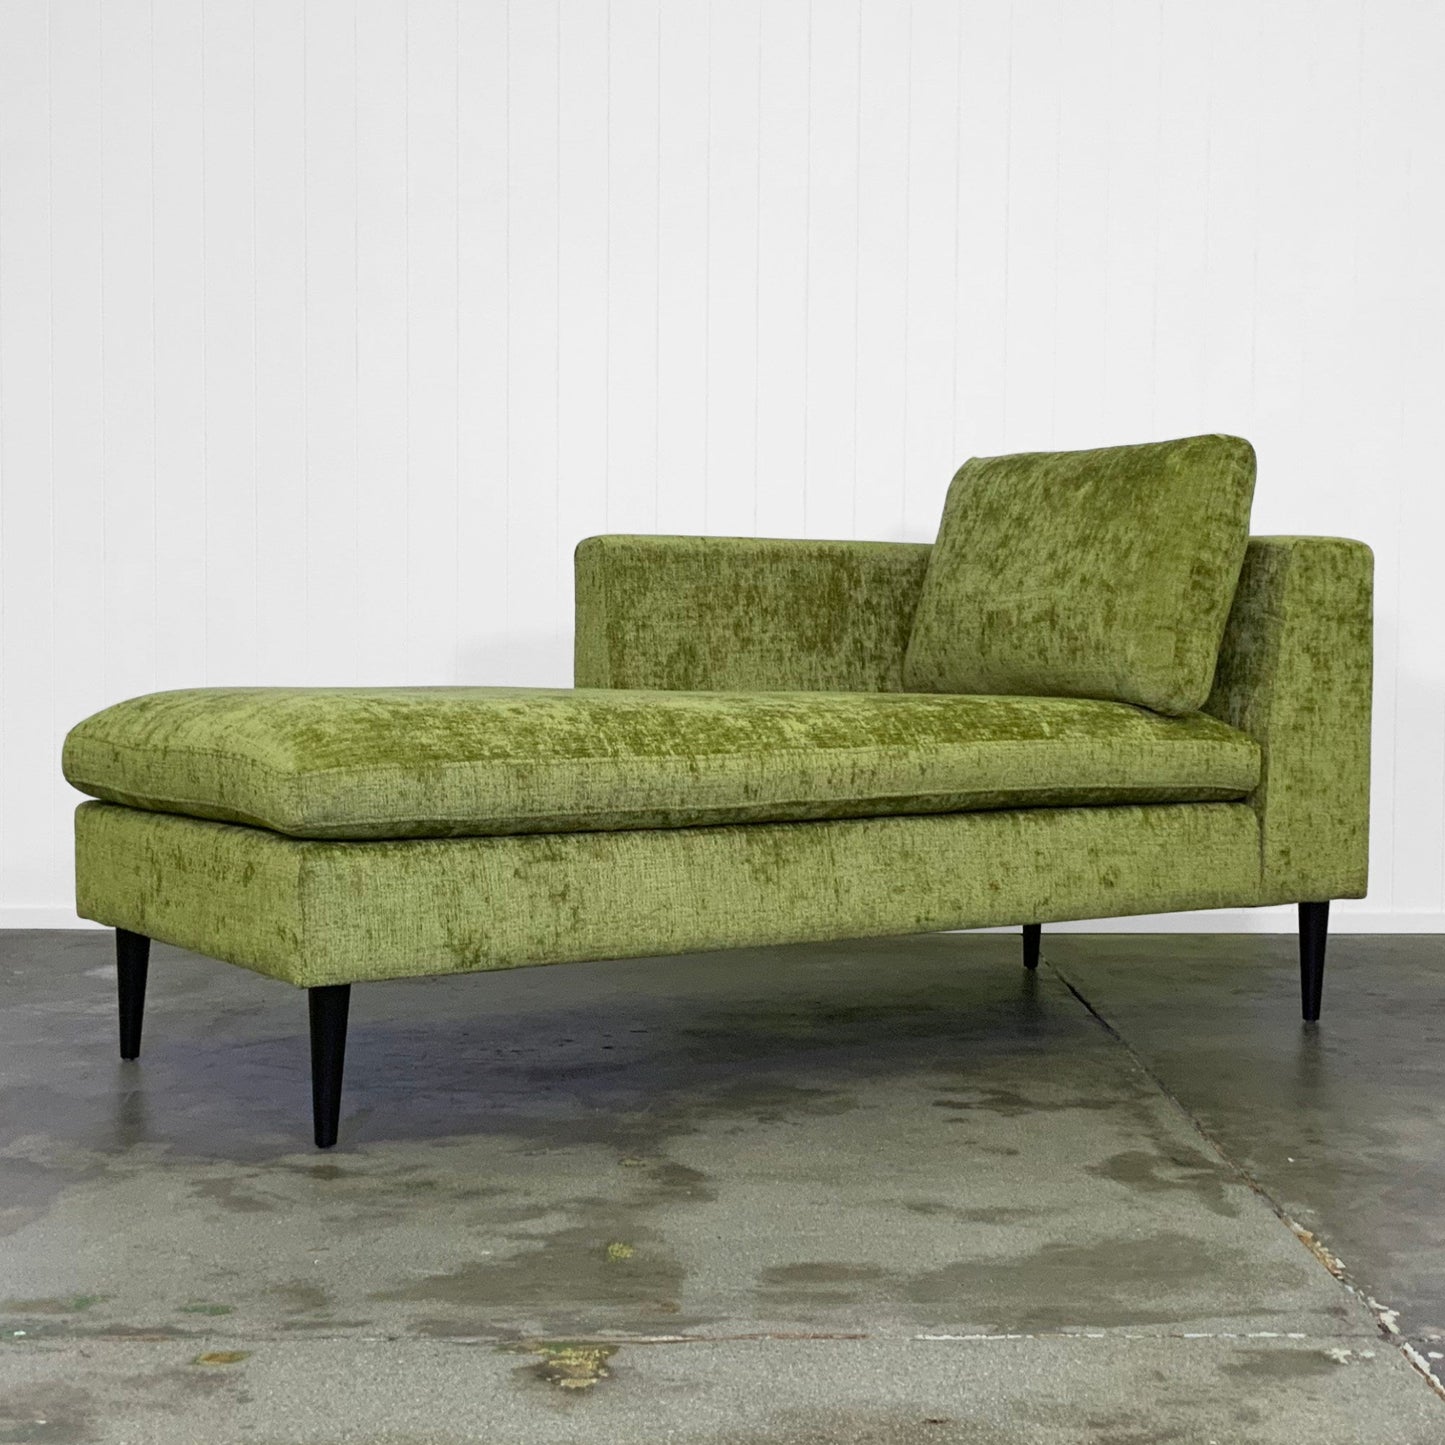 Elliott Sofa | Value Range Fabrics Multiple Sizes And Options Available Made To Order In Wa W.a Made